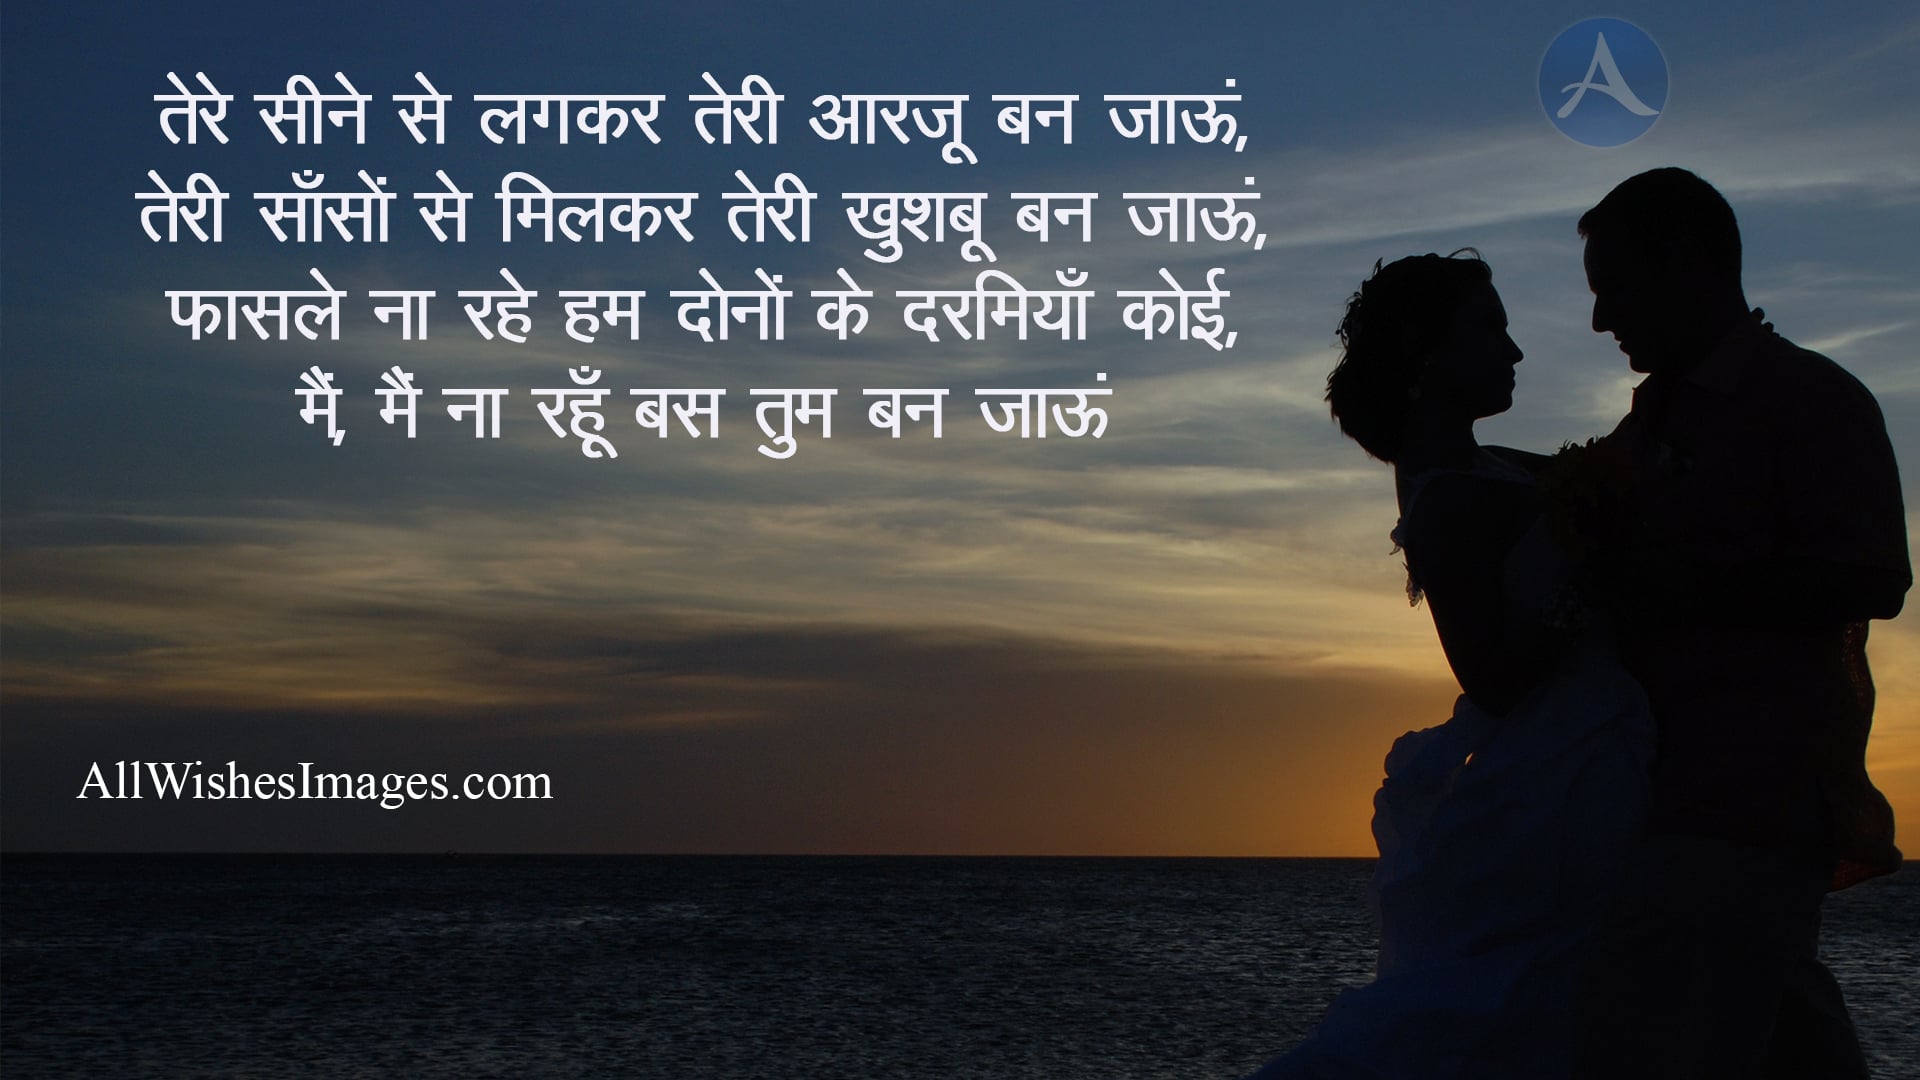 Love Shayari For Boyfriend With Images (2022) || Romantic Love Shayari For  Him With Images - All Wishes Images - Images for WhatsApp